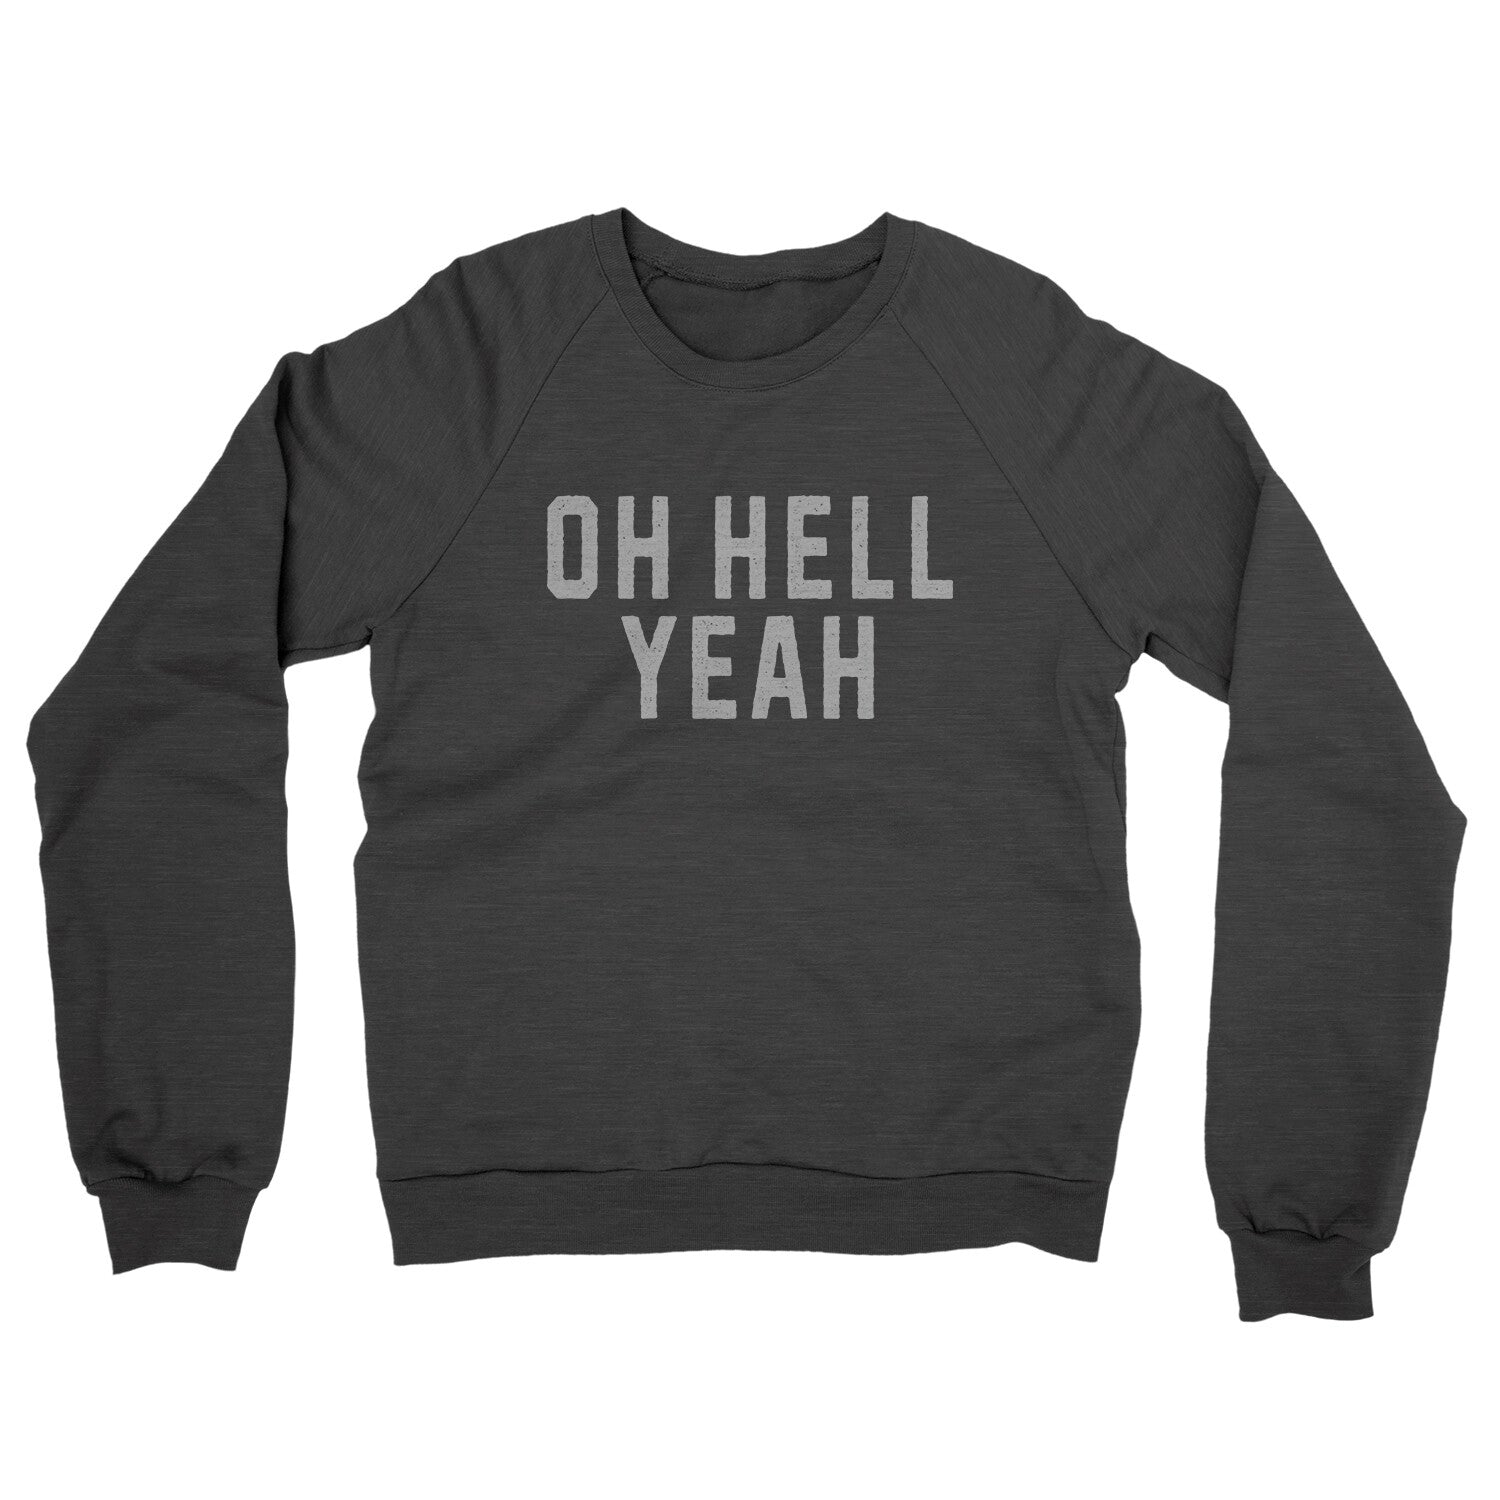 Oh Hell Yeah in Charcoal Heather Color